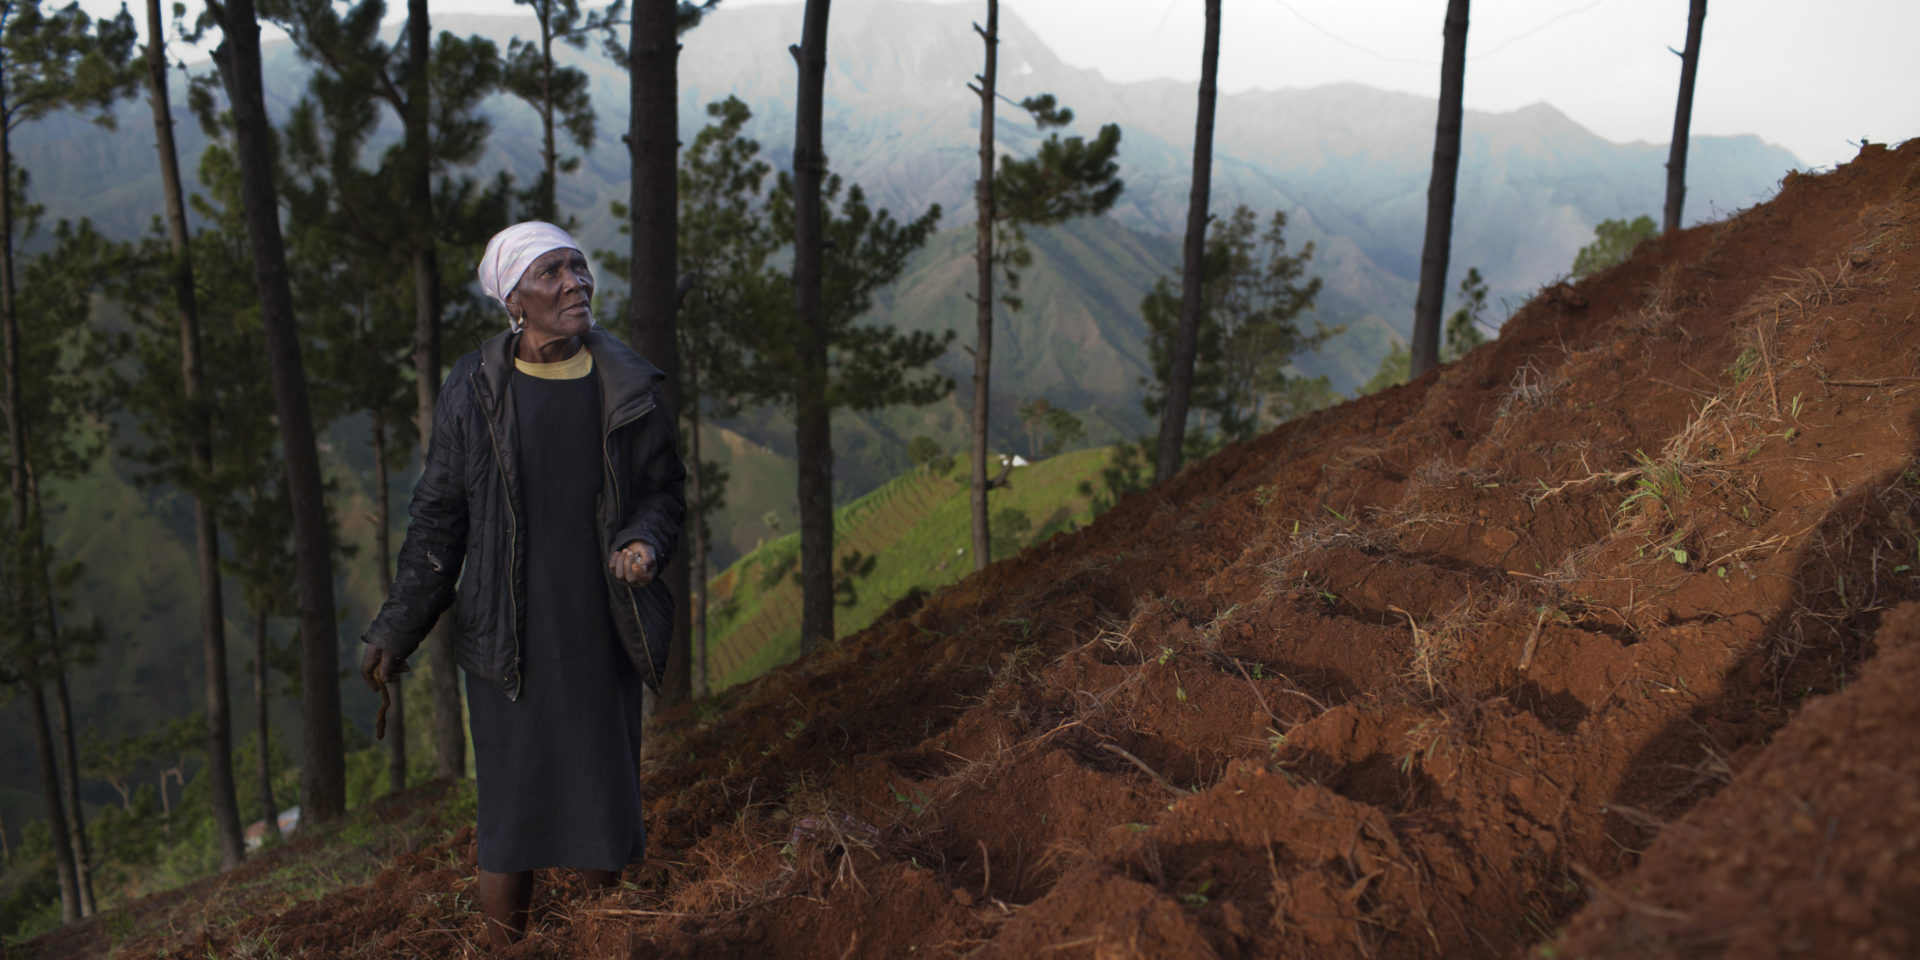 Image of a woman looking up a hill with freshly tilled red soil.